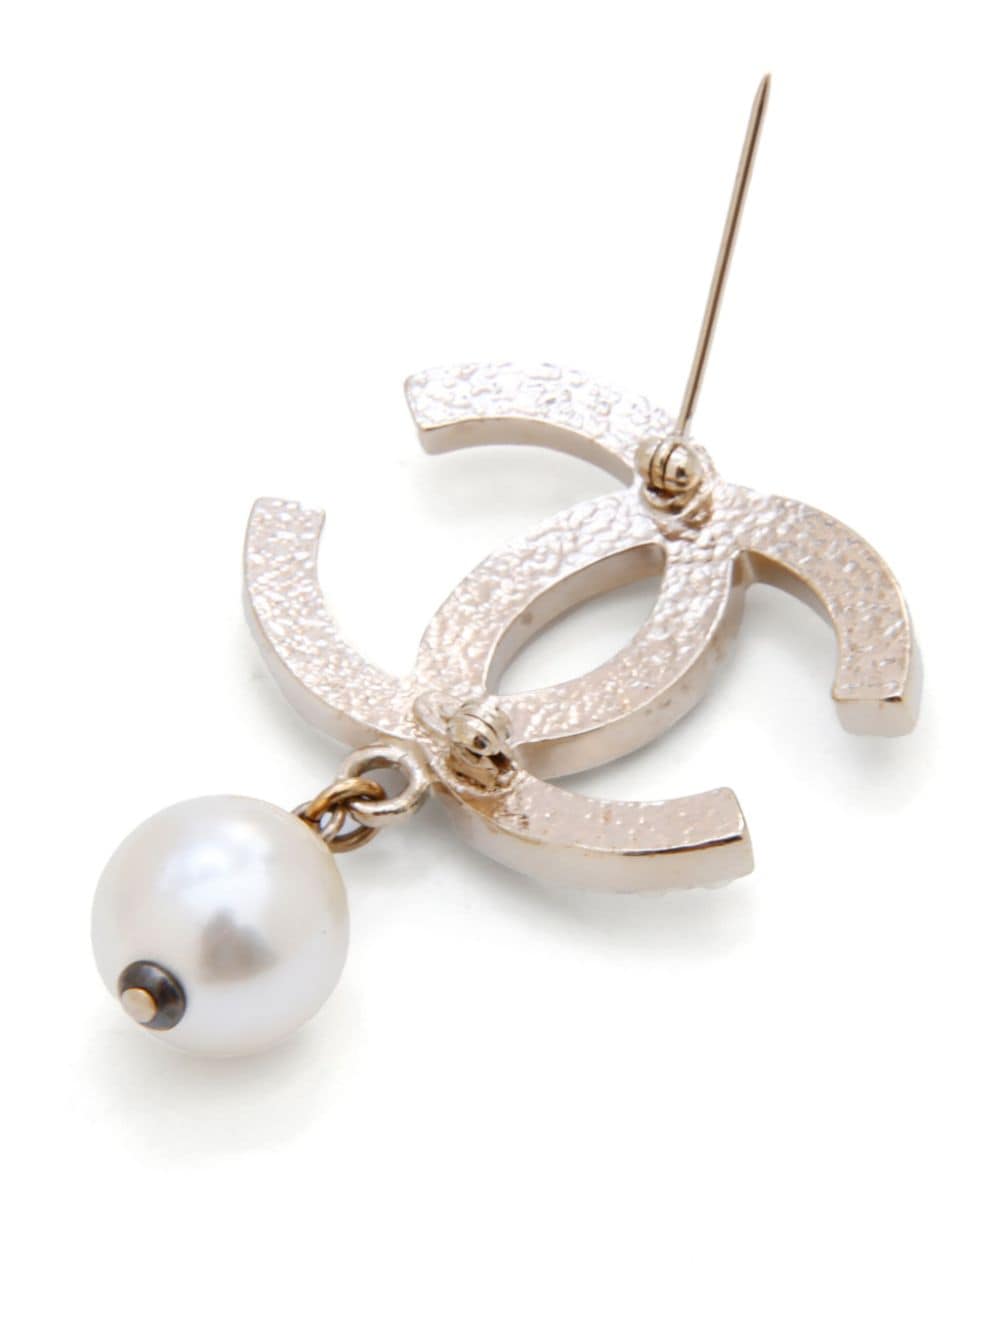 CHANEL Pre-Owned 2000s CC faux-pearl Crystal Embellished Brooch - Farfetch